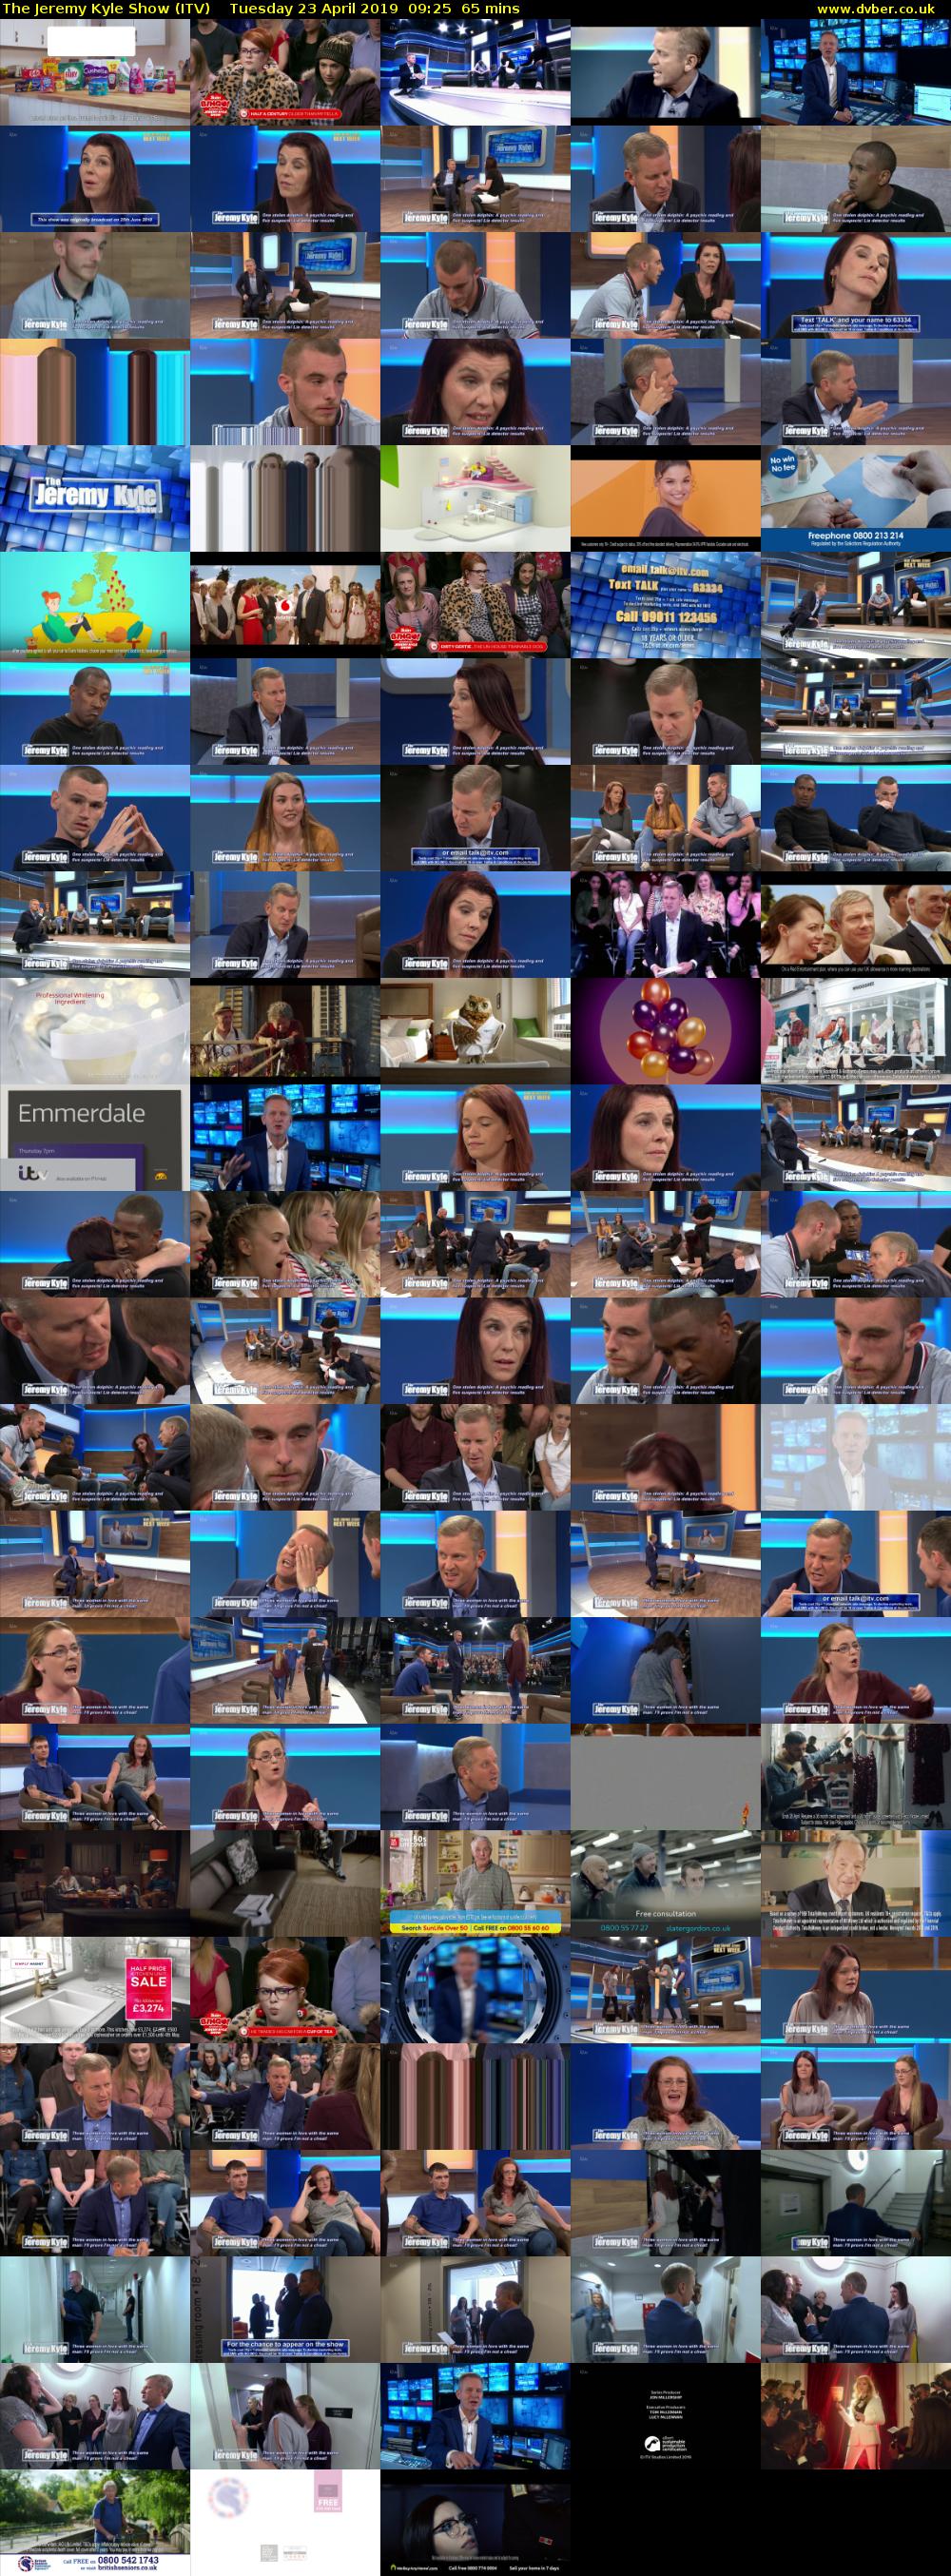 The Jeremy Kyle Show (ITV) Tuesday 23 April 2019 09:25 - 10:30